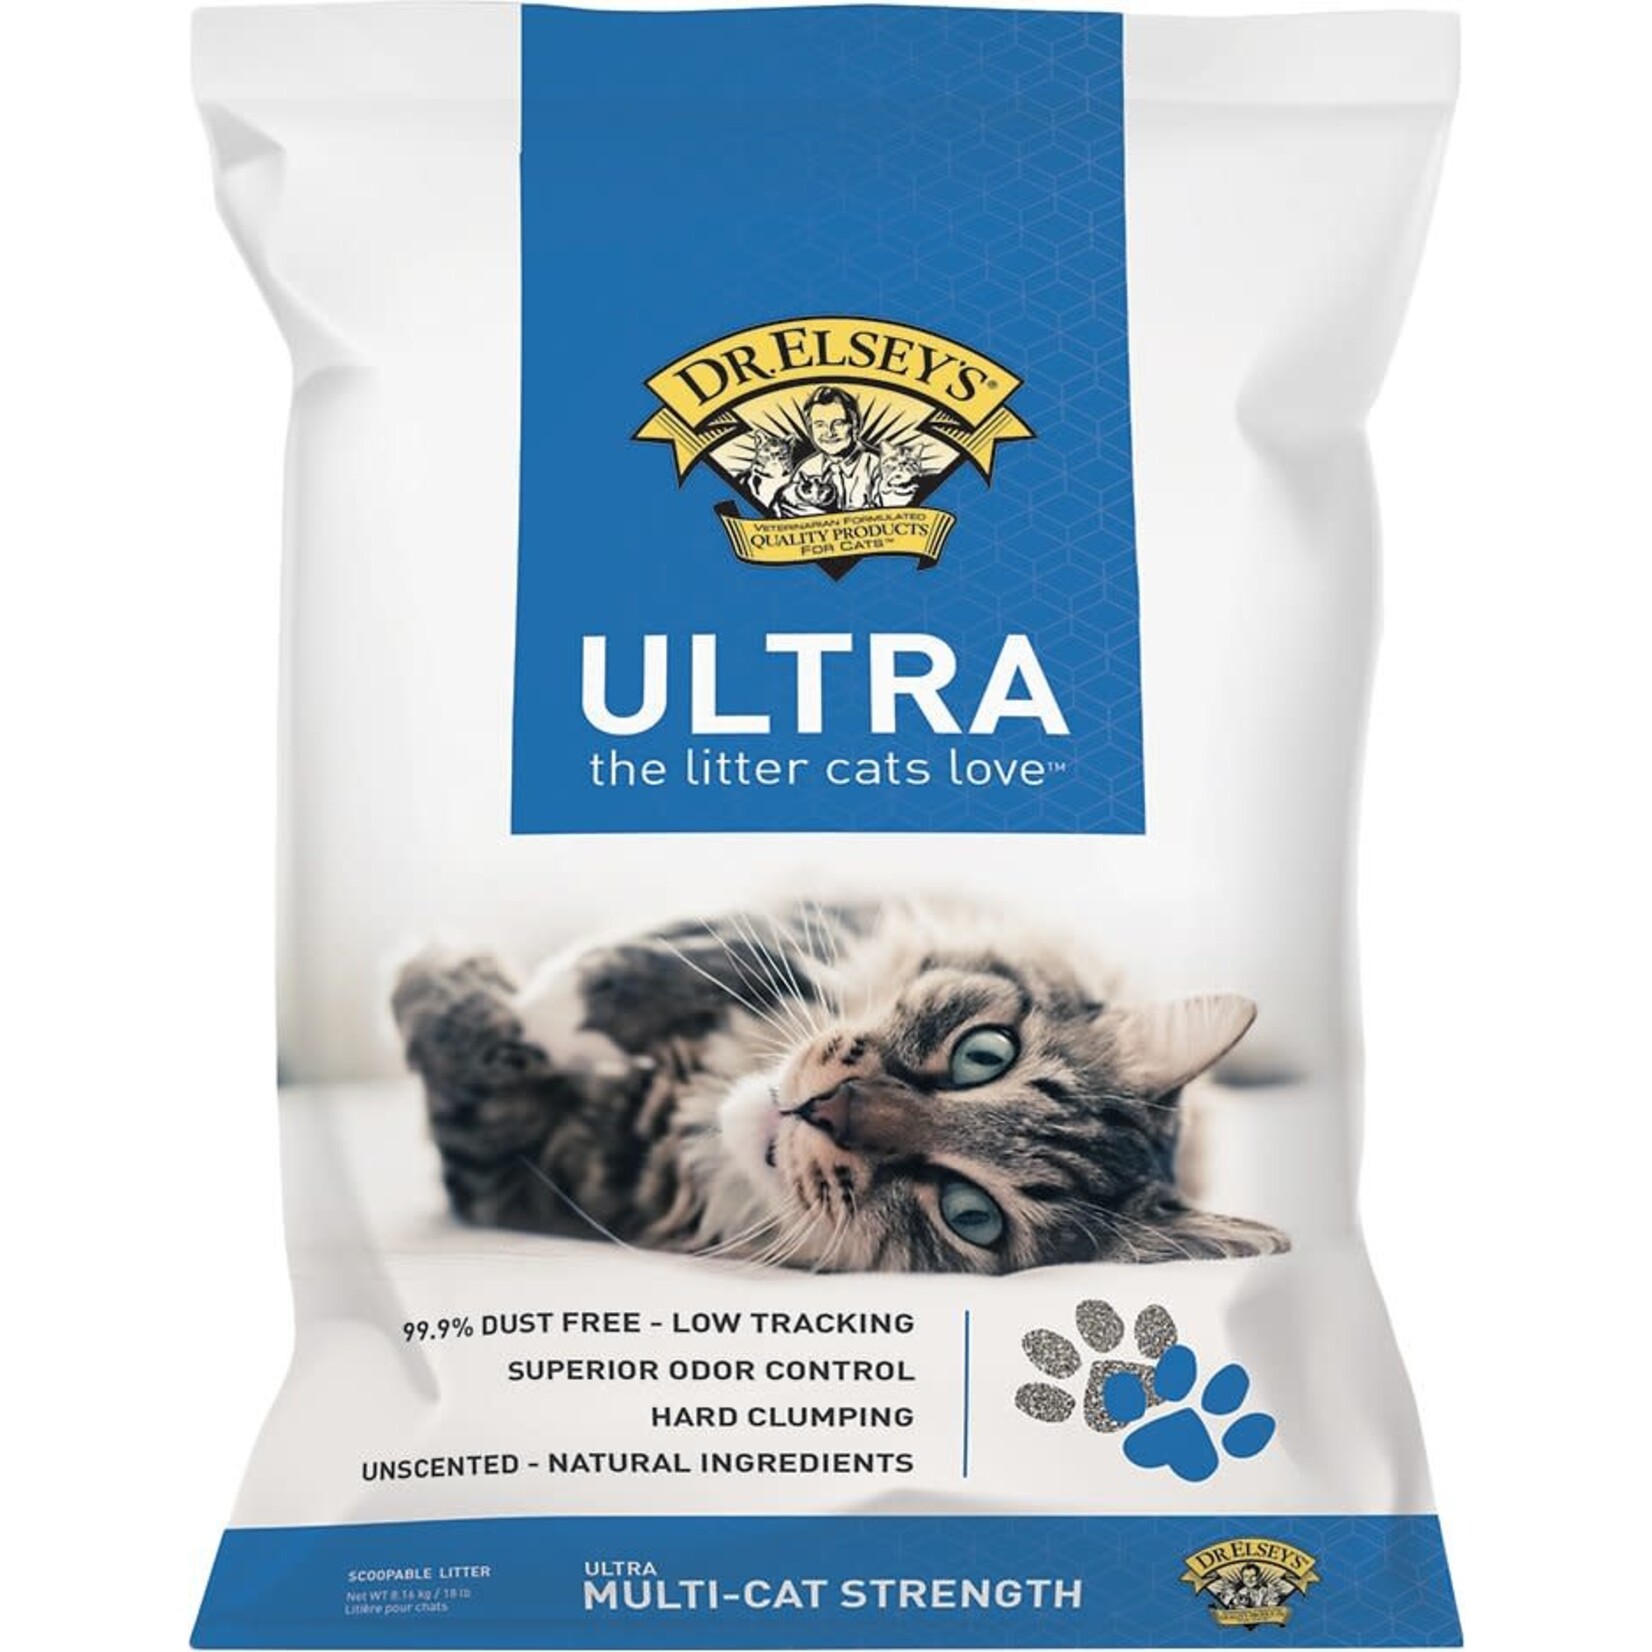 Dr. Elsey's Precious Cat Dr. Elsey's Precious Cat Ultra Unscented Clumping Clay Cat Litter